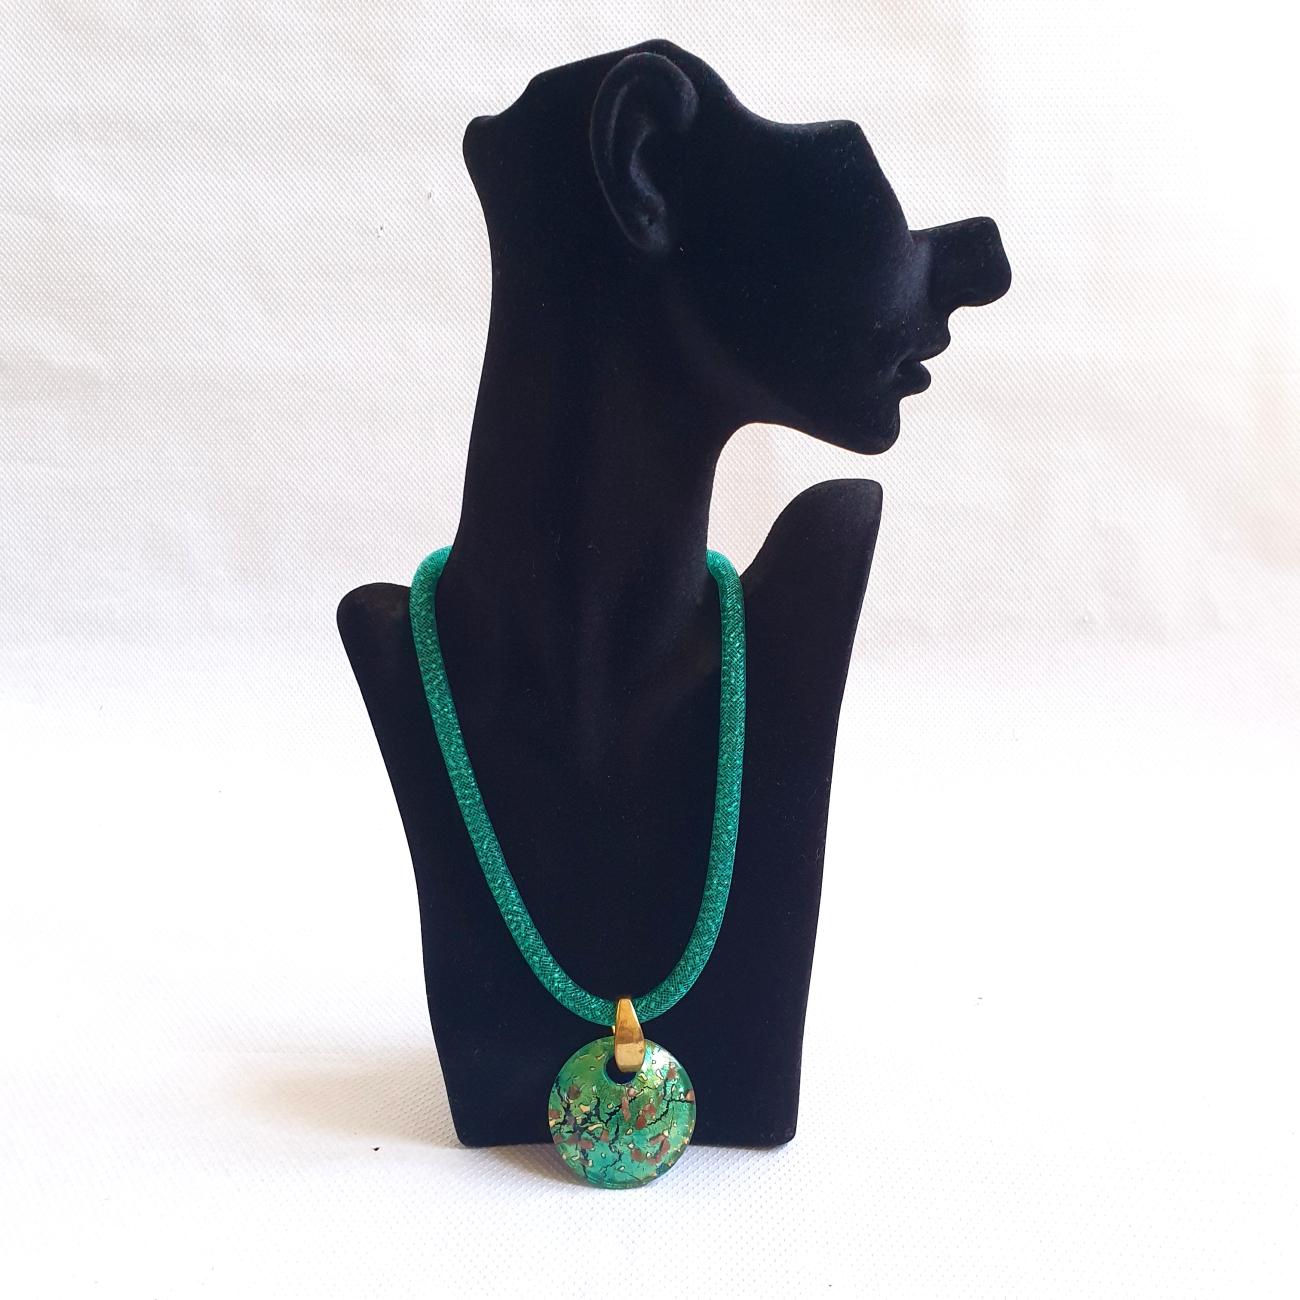 Murano glass pendant costume necklace, Italy.
The Murano glass convex ornement and the brass hook are vintage, circa 1970s. 
The beaded chain and clasp are new.
In a beautiful bright green color, and excellent condition.
